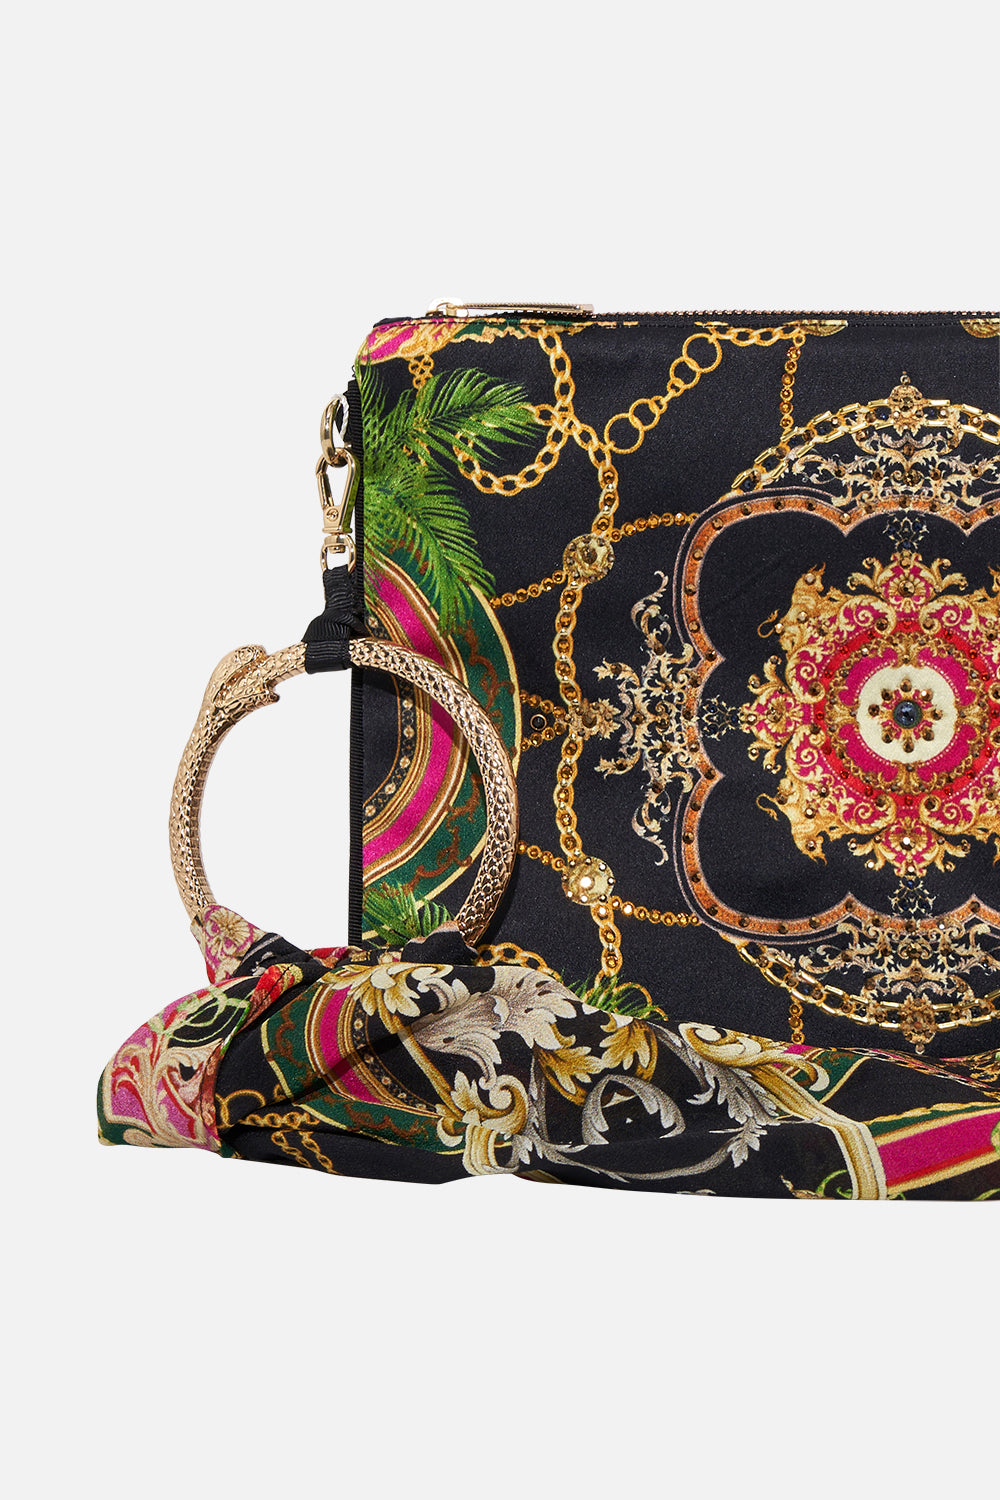 Detail view of CAMILLA silk ring scarf clutch bag in Jealousy And Jewels print